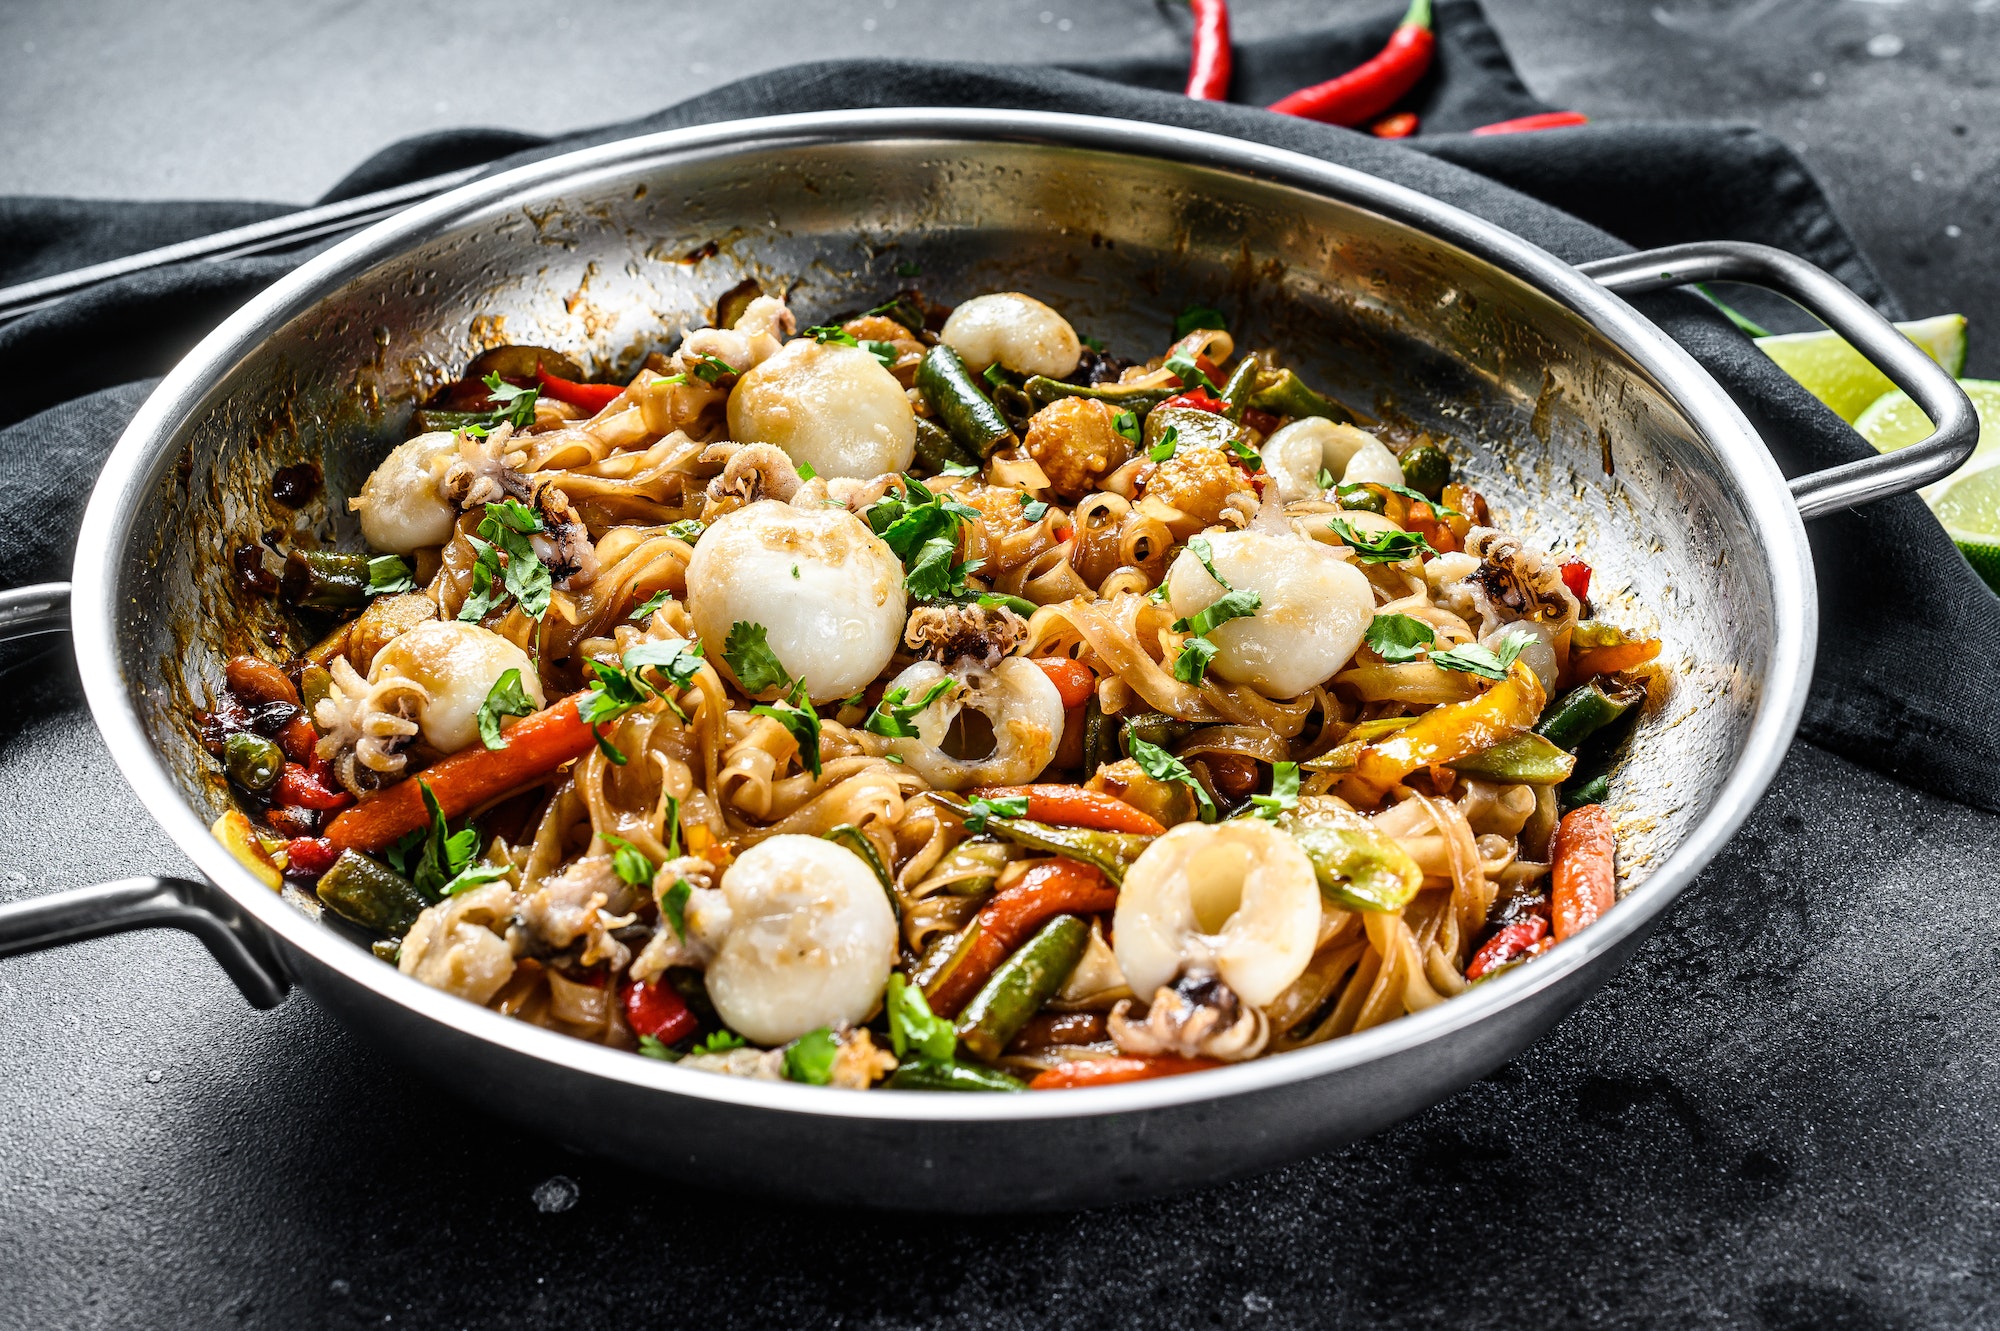 Stir fry noodles with seafood and vegetables in a wok pan. Black background. Top view